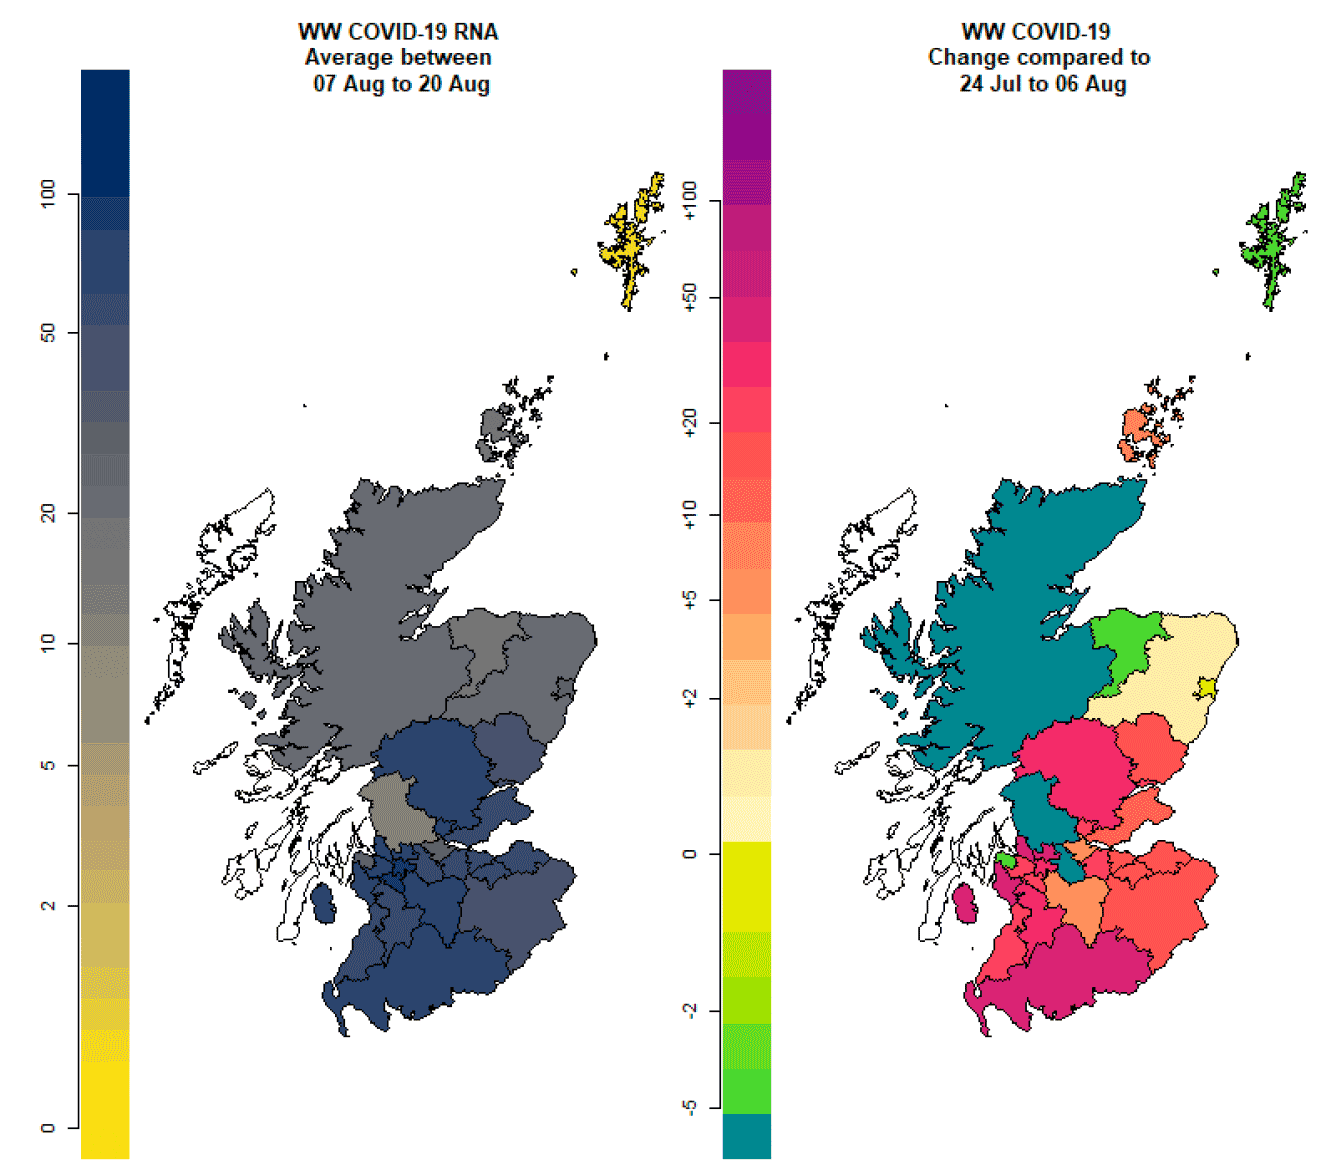 Two maps showing the wastewater Covid-19 levels for each local authority. The first map shows the levels between 7th and 20th August, and the second shows differences from the previous two weeks.